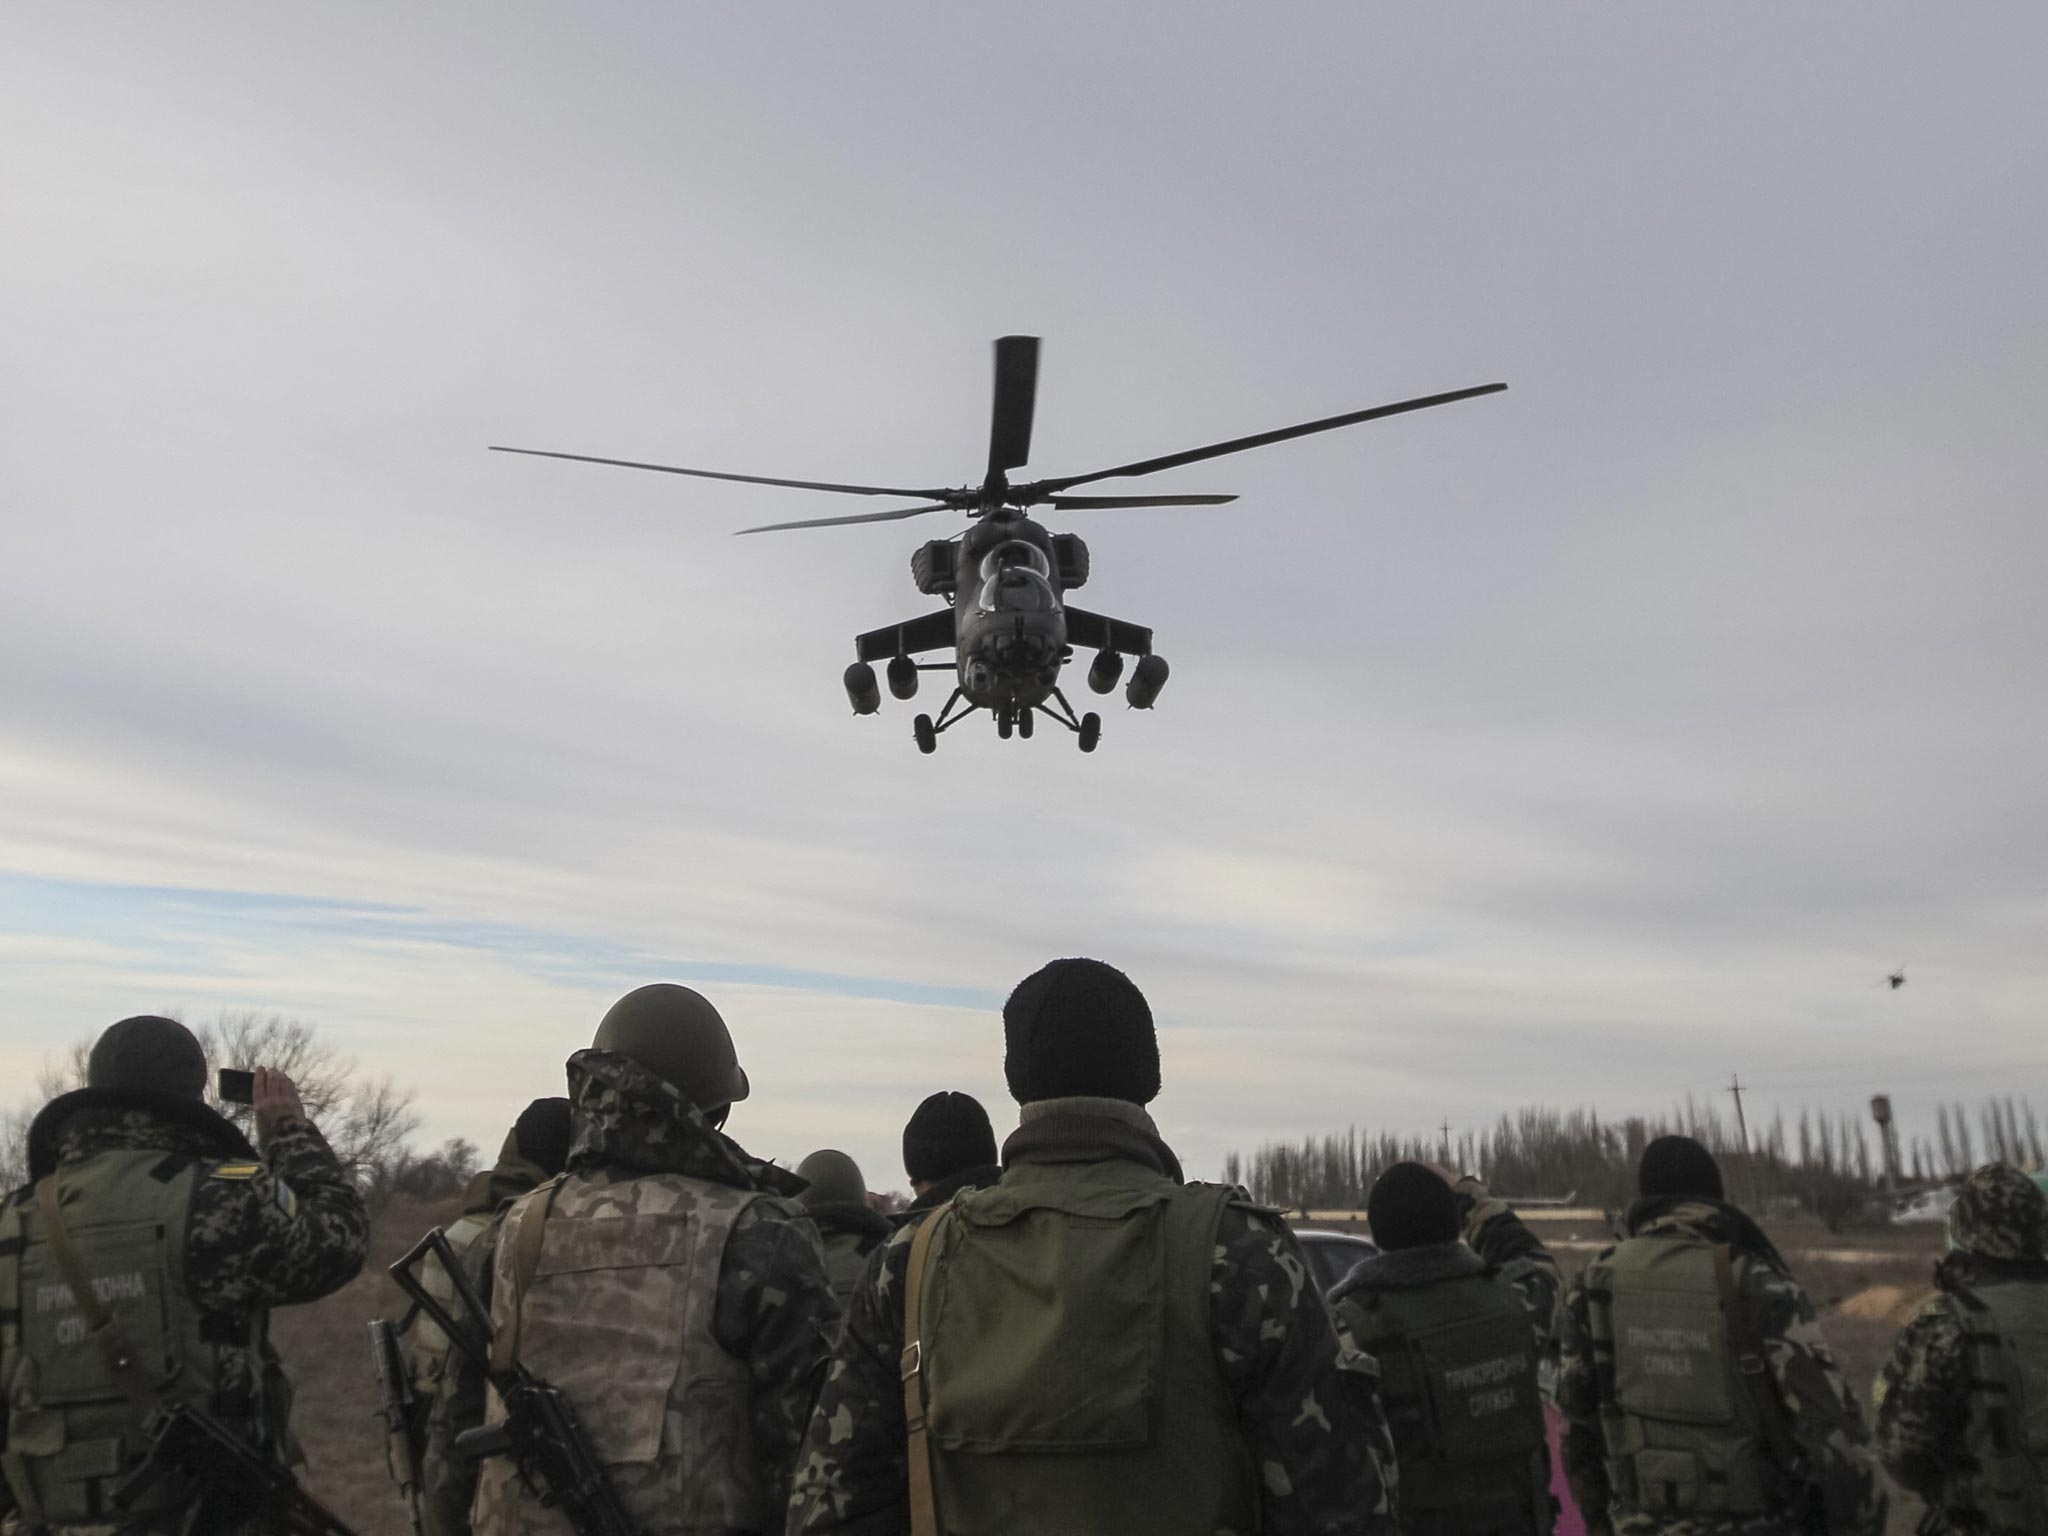 A Russian army MI-35 military helicopter patrols the area as Ukrainian servicemen guard a checkpoint near the village of Strelkovo in Kherson region adjacent to Crimea